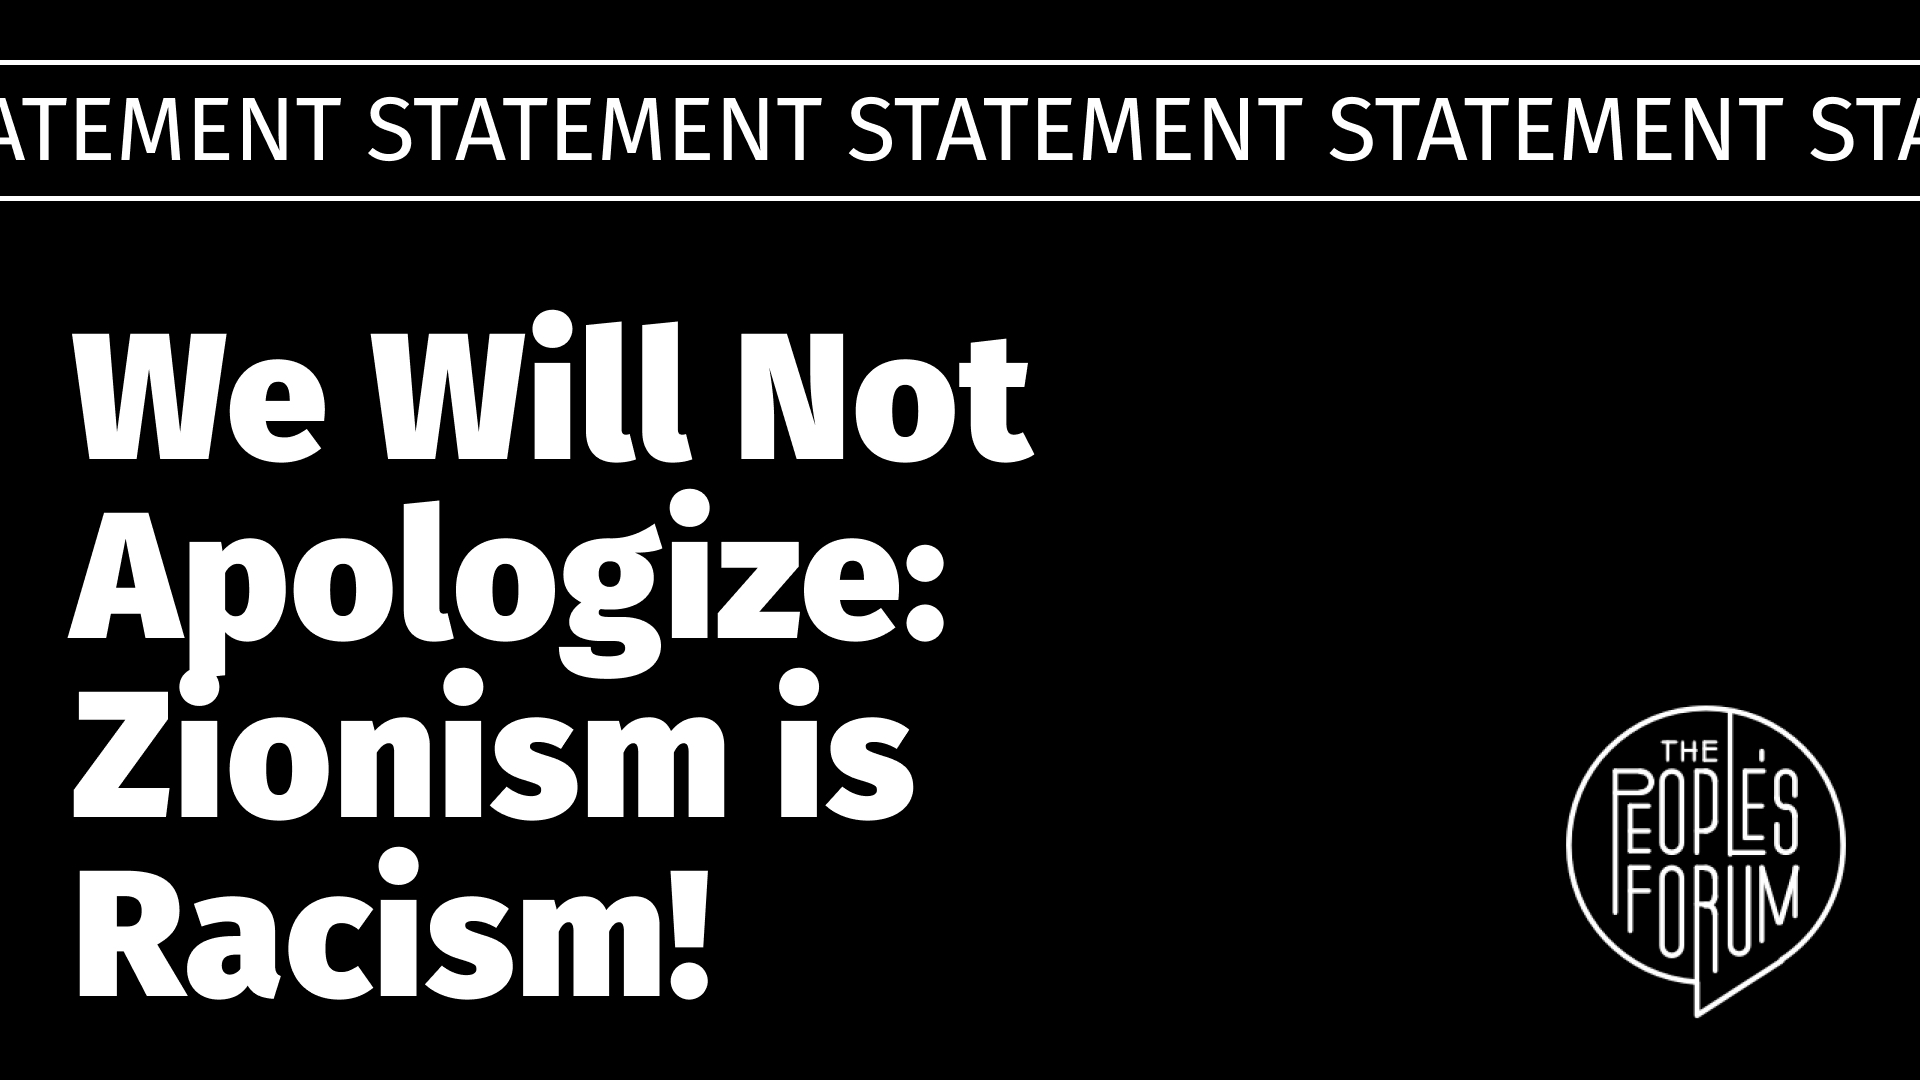 Black background with the words STATEMENT STATEMENT running across the top. In bold white letters it reads: "We Will Not Apologize: Zionism is Racism!" with The People's Forum logo